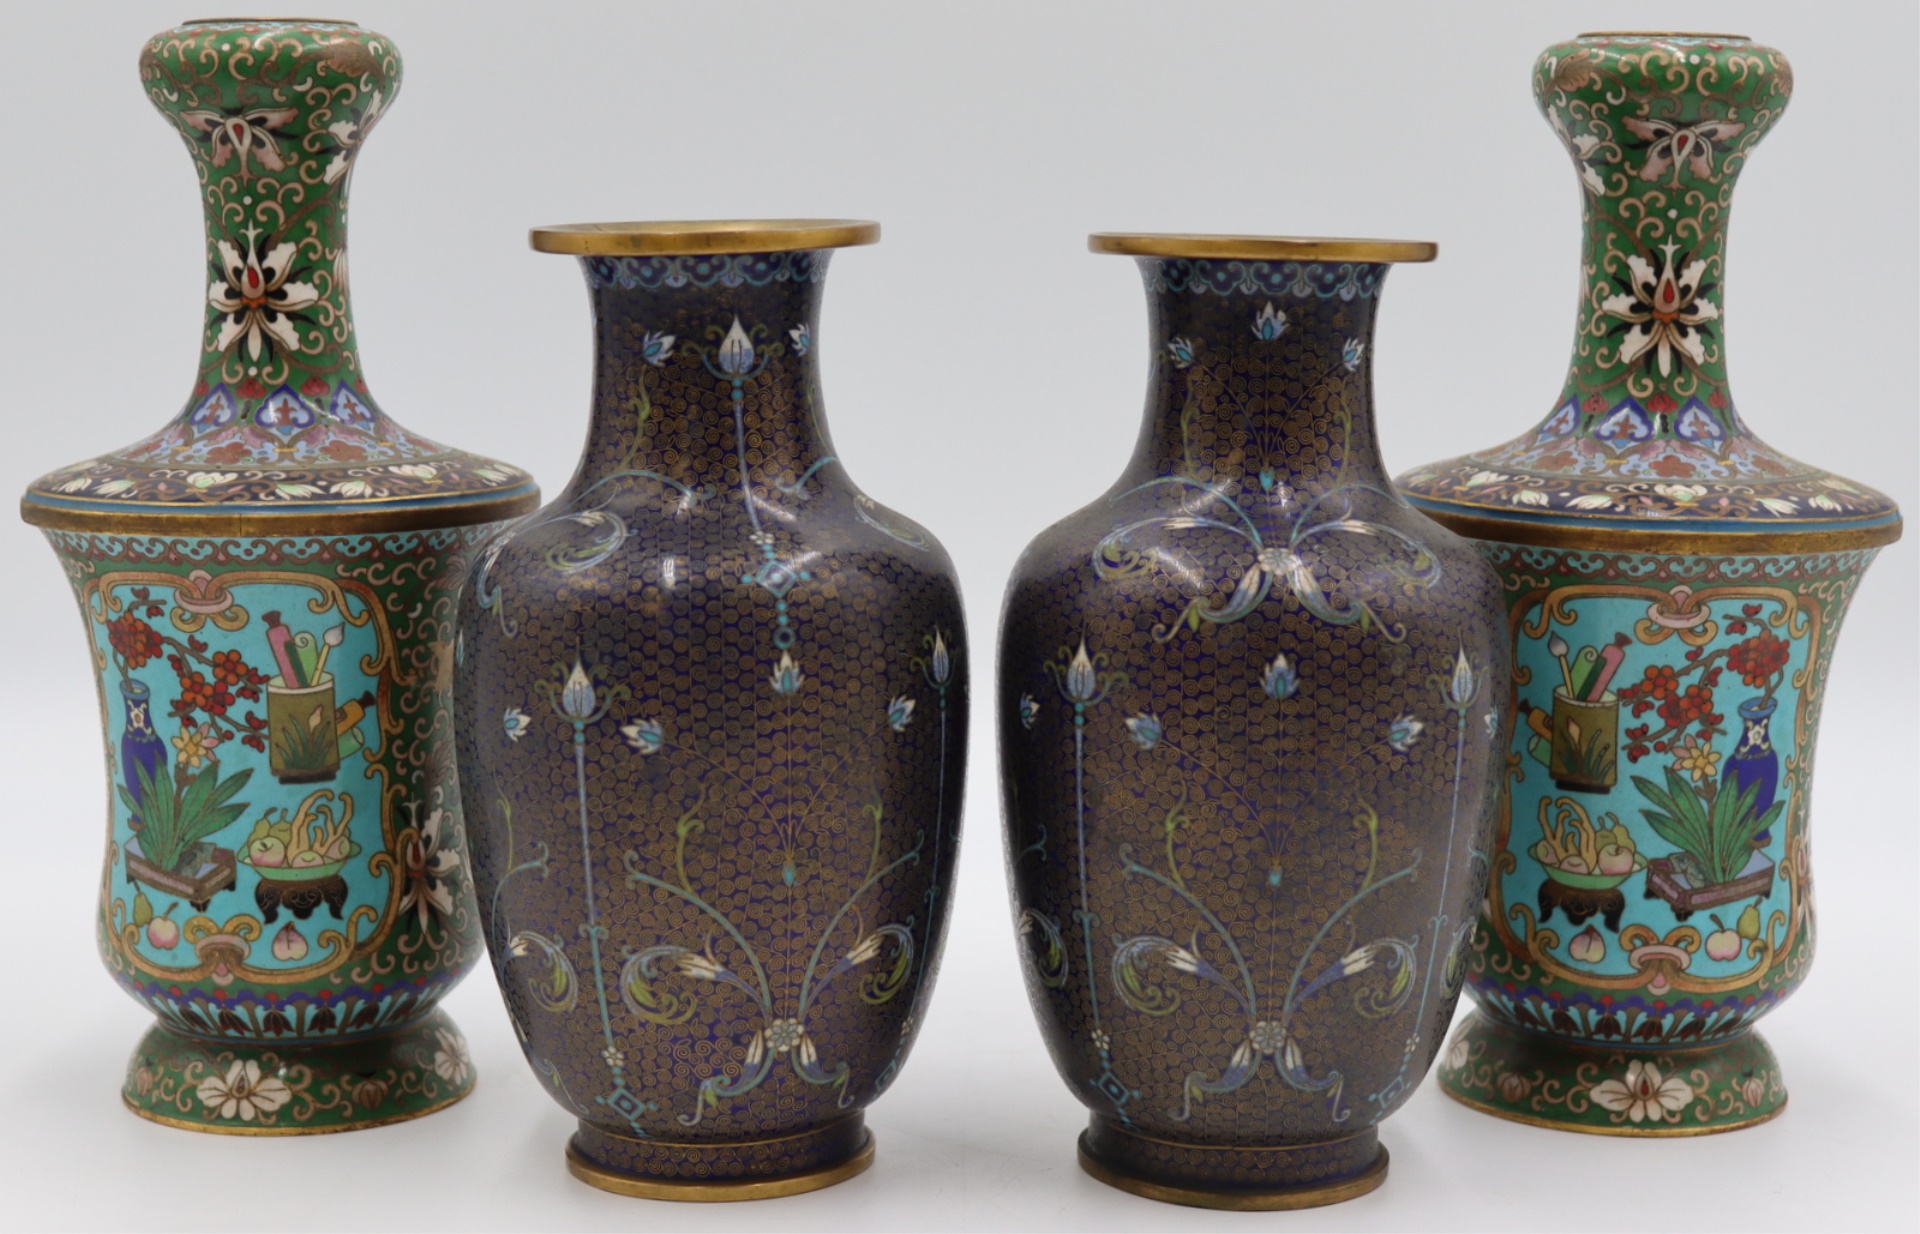  2 PAIR OF CHINESE CLOISONNE VASES  3be327